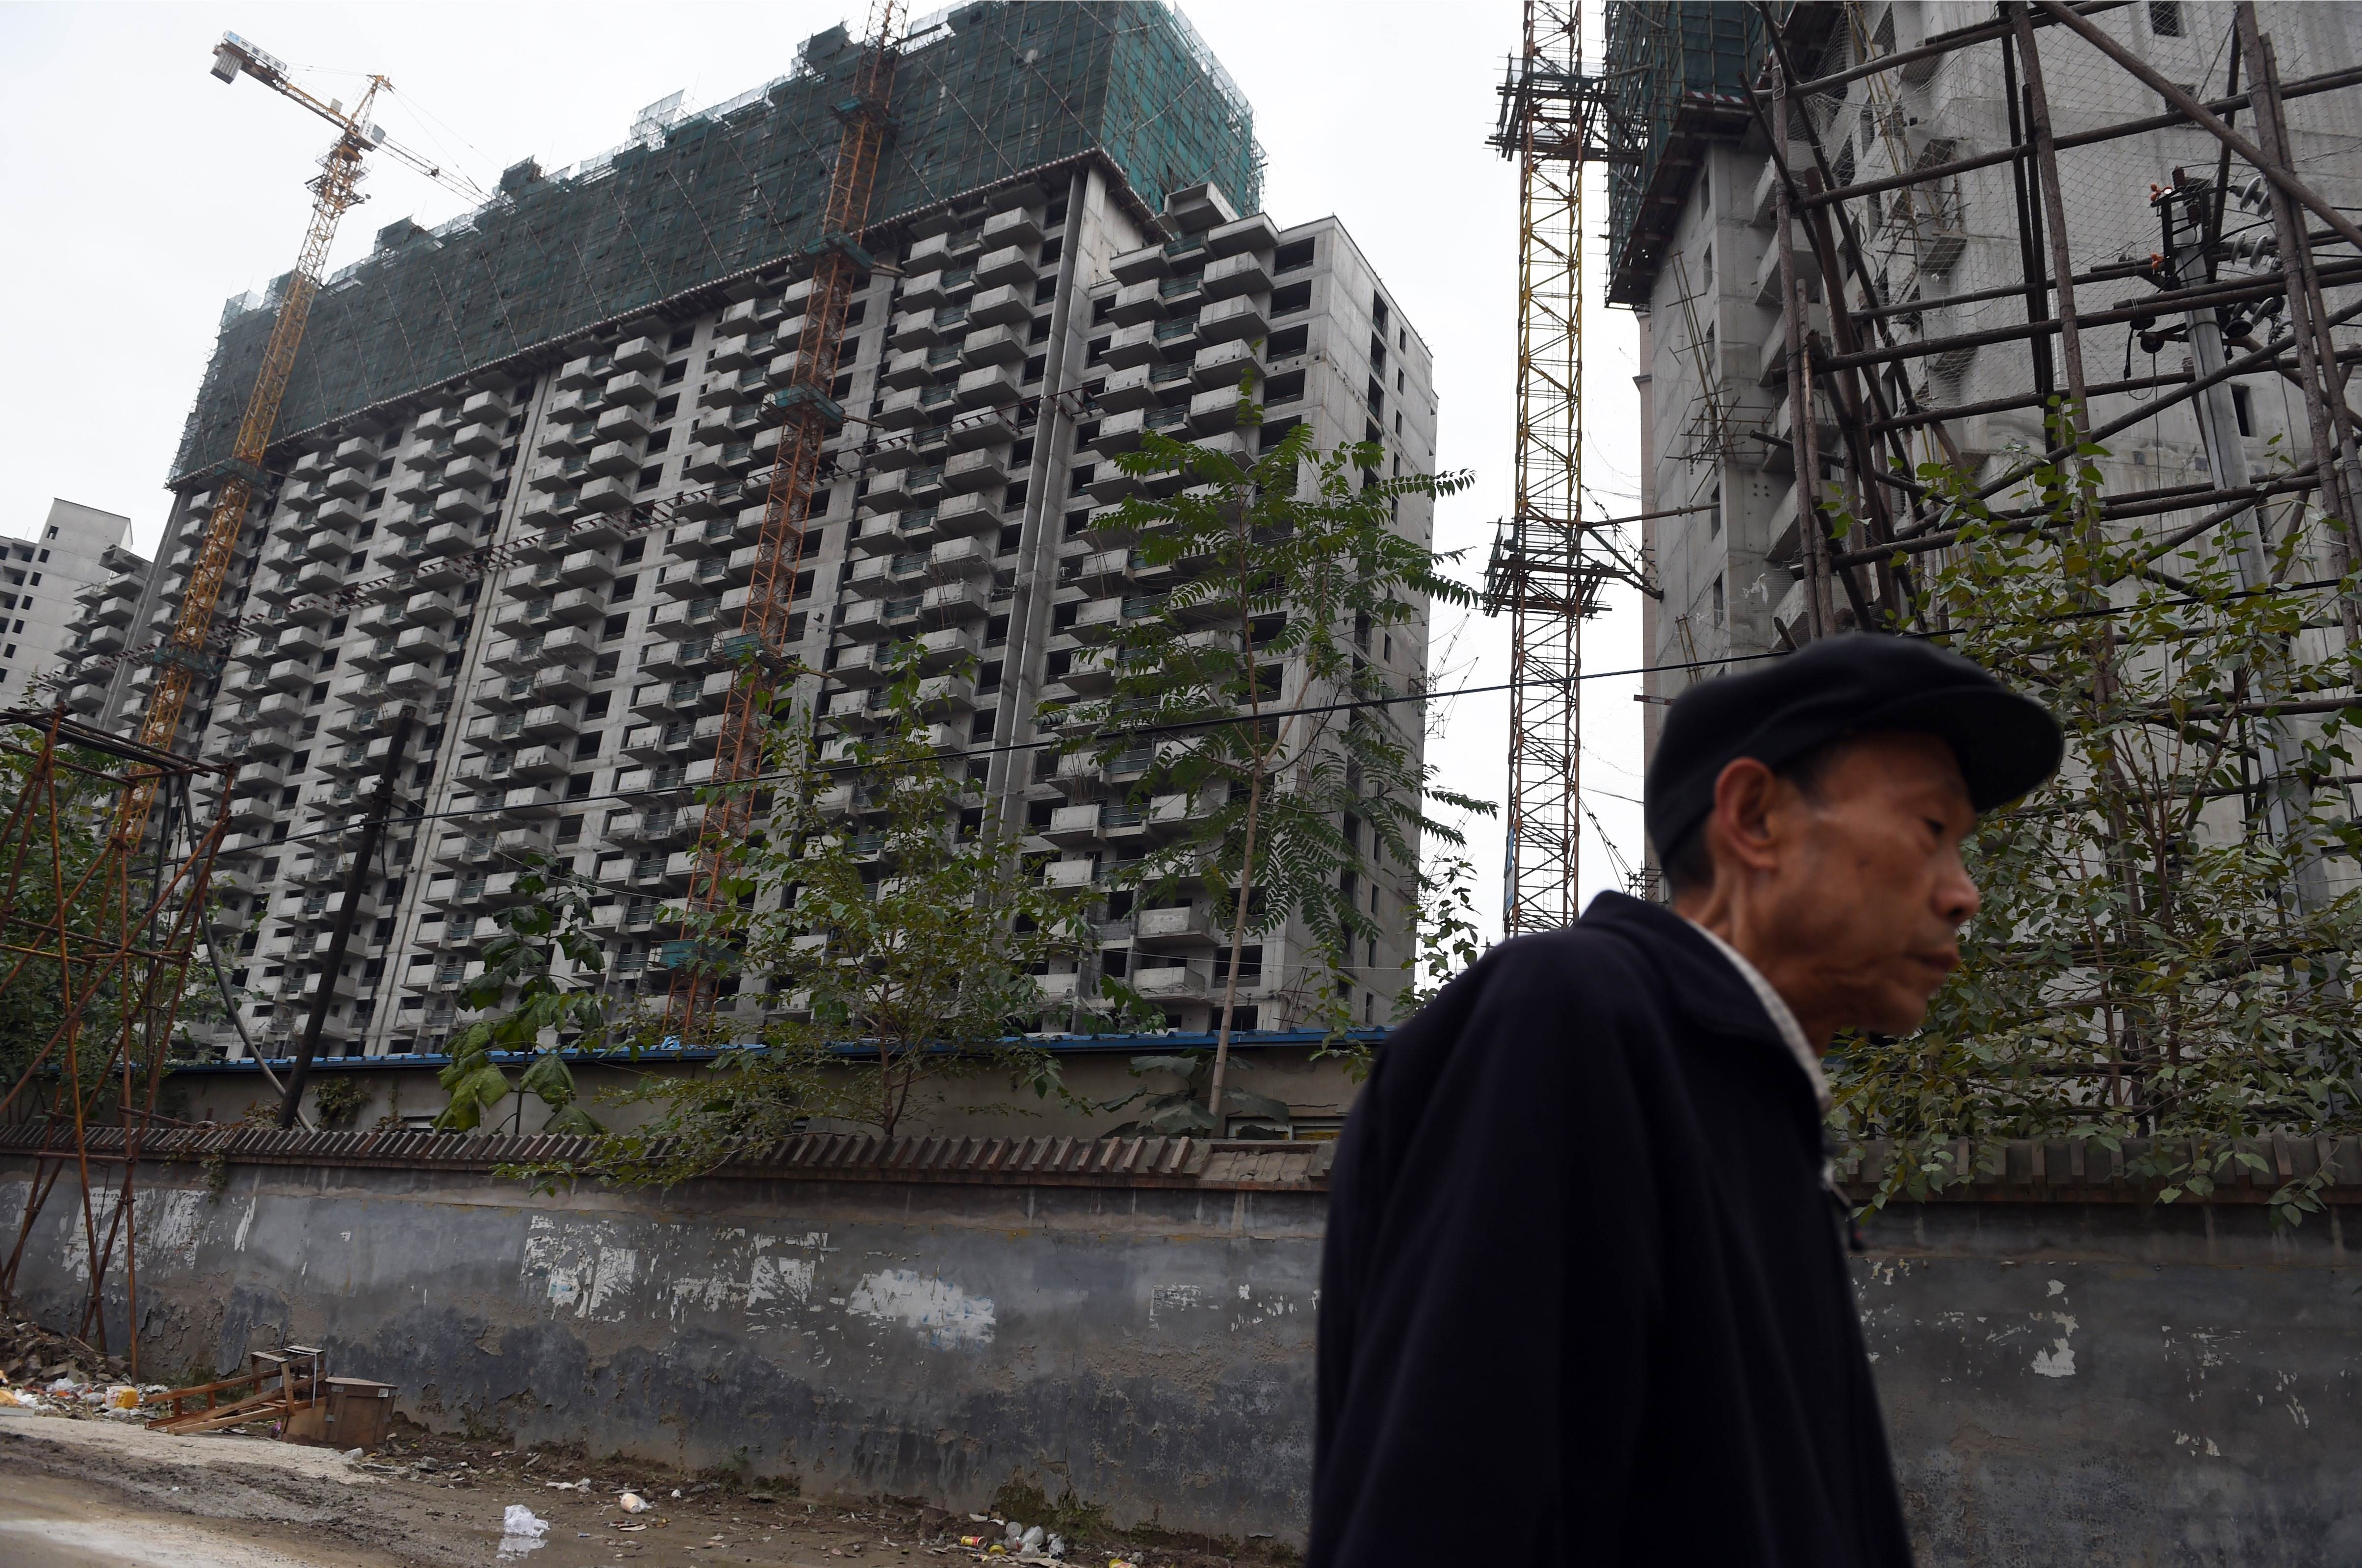 A man walks past a construction site for apartment buildings in Beijing on October 25, 2015. China's leaders will gather on October 26 to hash out a new Five Year Plan to battle slowing growth, and analysts say they must choose between chasing a traditional GDP target and embracing reforms such as to the "one child policy" to help the country develop its full potential. AFP PHOTO / GREG BAKER